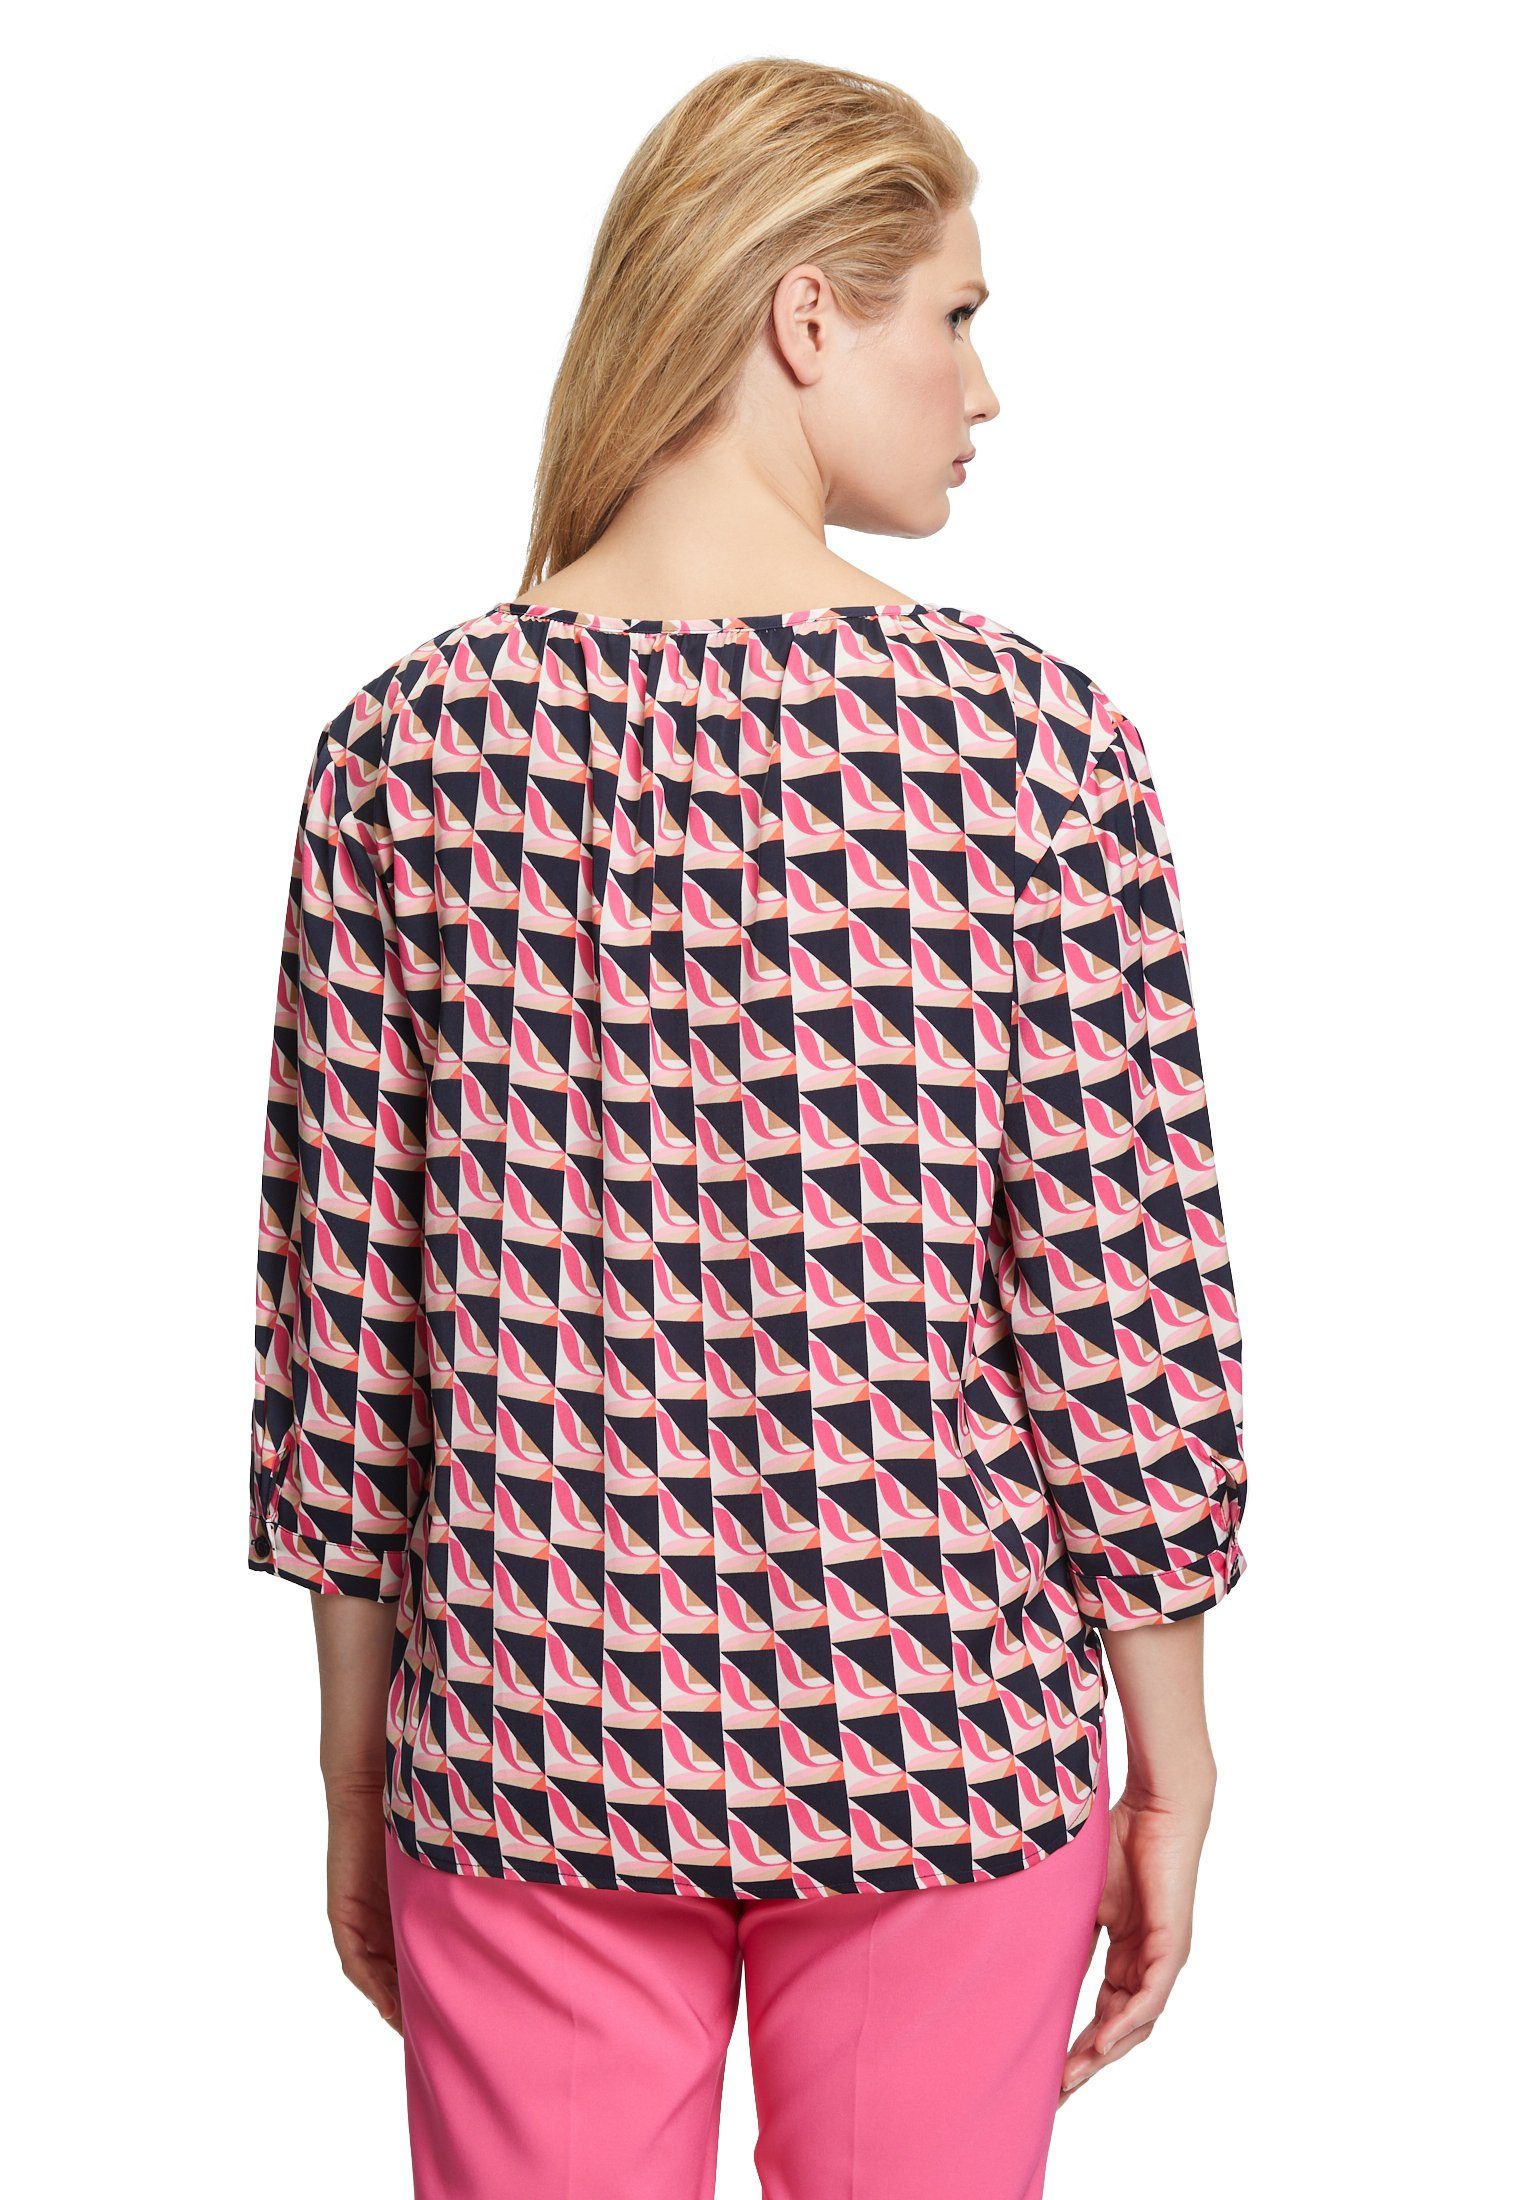 Betty Barclay Klassische Bluse Muster Rosa mit Muster